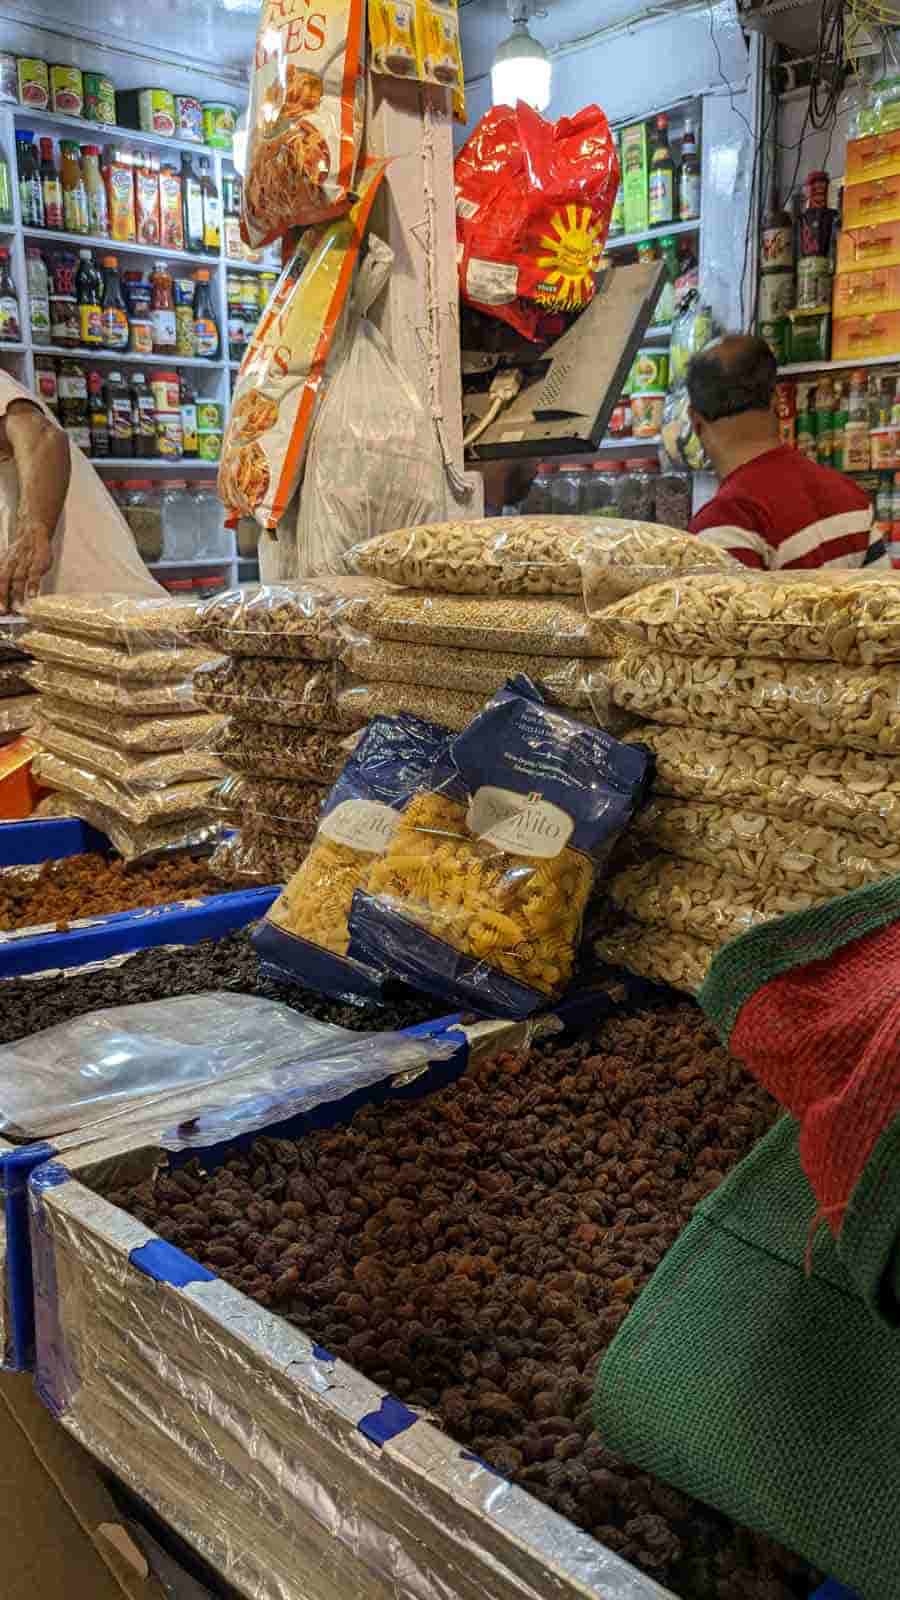 Vendors selling dry fruits are doing brisk business this year as the season for baking Christmas cakes is upon us. ‘Usually we close the shop by 7pm but nowadays we are staying open till later to cater to the demand,’ said Anup Kumar Gupta, wholesalers of spices and dry fruits at New Market 